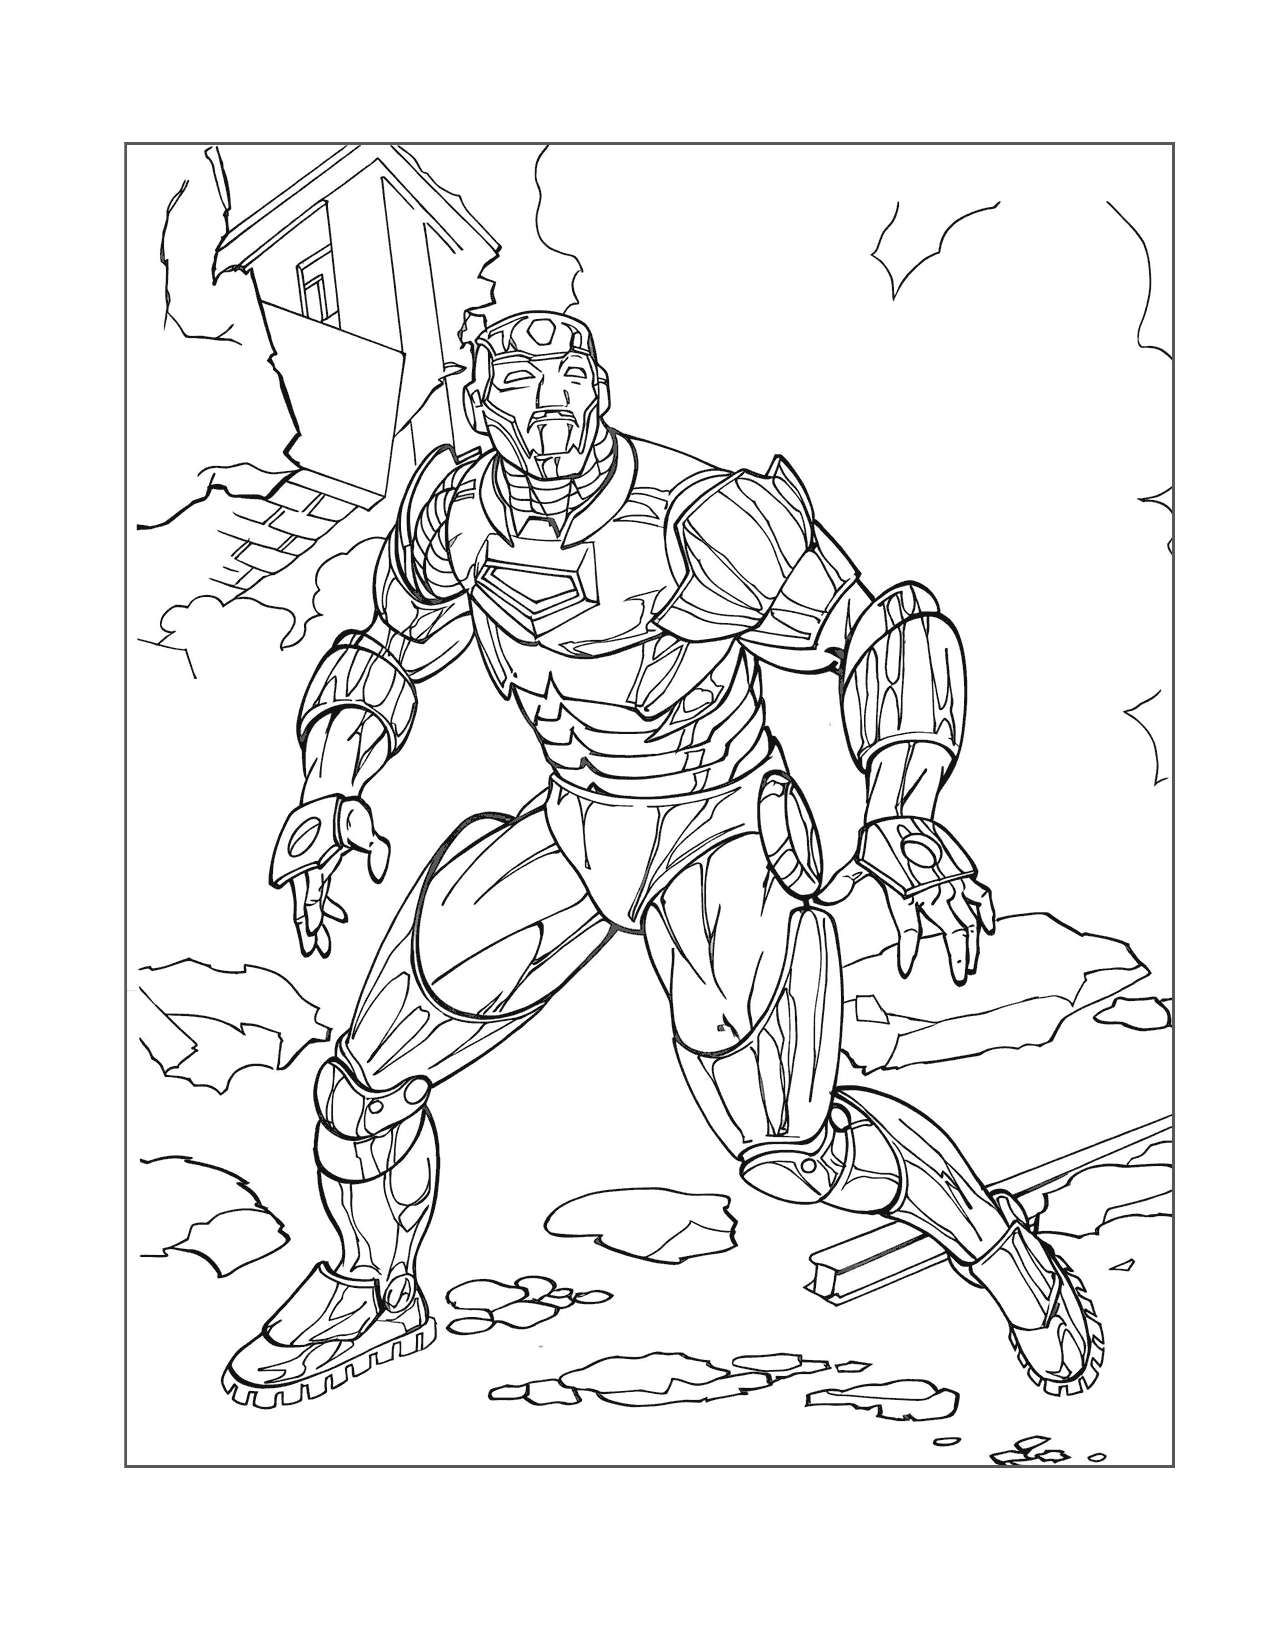 Iron Man Battle Scene Coloring Page